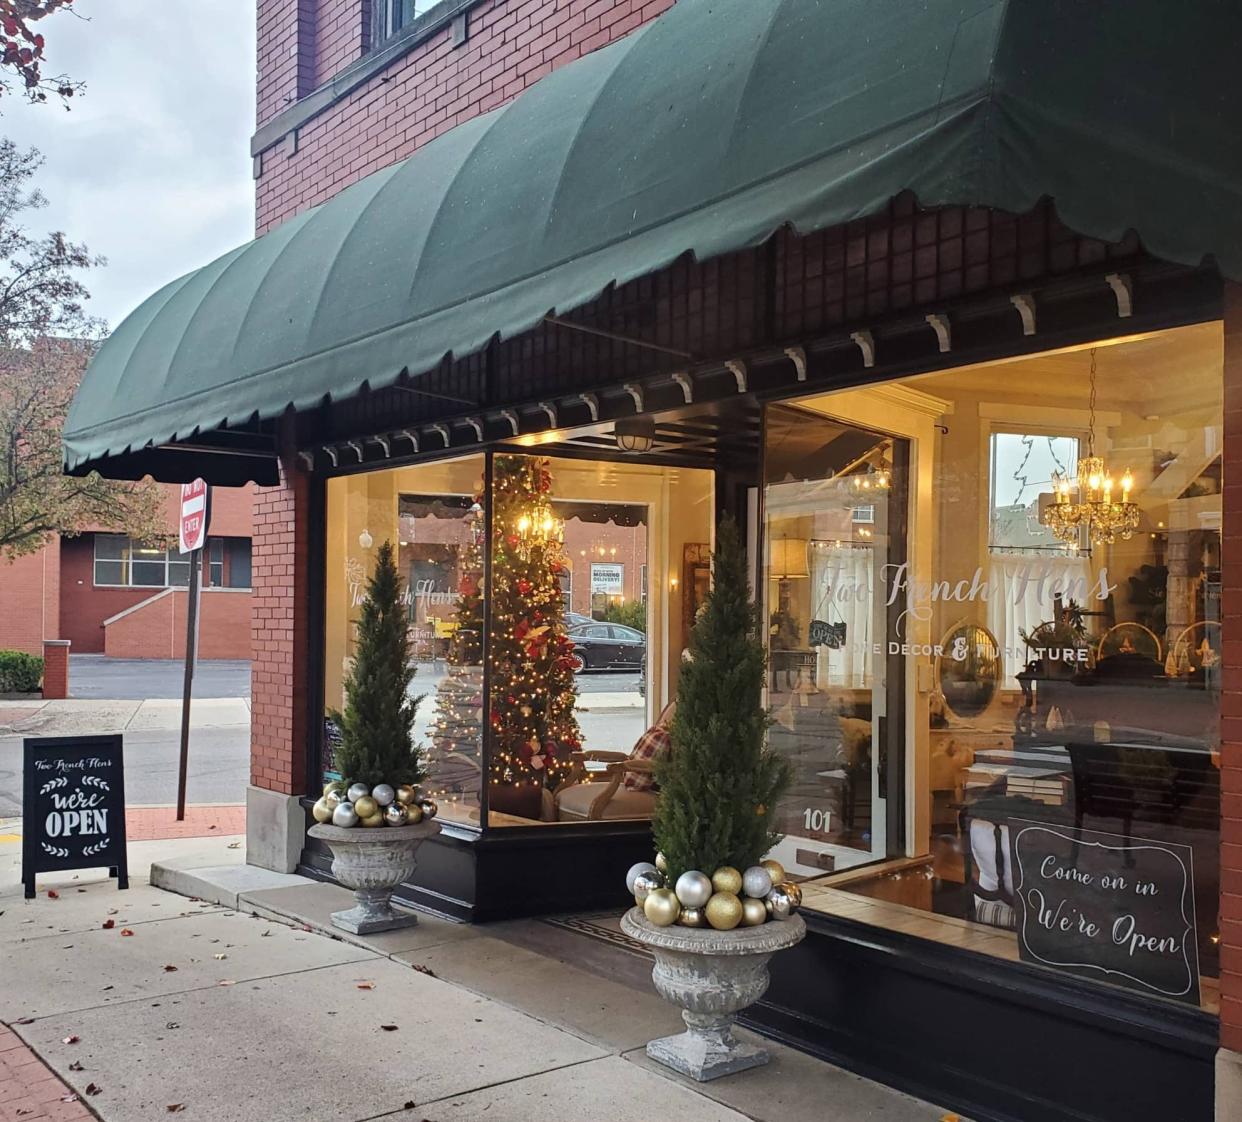 Two French Hens, 101 W. Front St., is among the businesses participating in Saturday's Small Business Saturday in downtown Monroe.
(Photo: PROVIDED BY TWO FRENCH HENS)